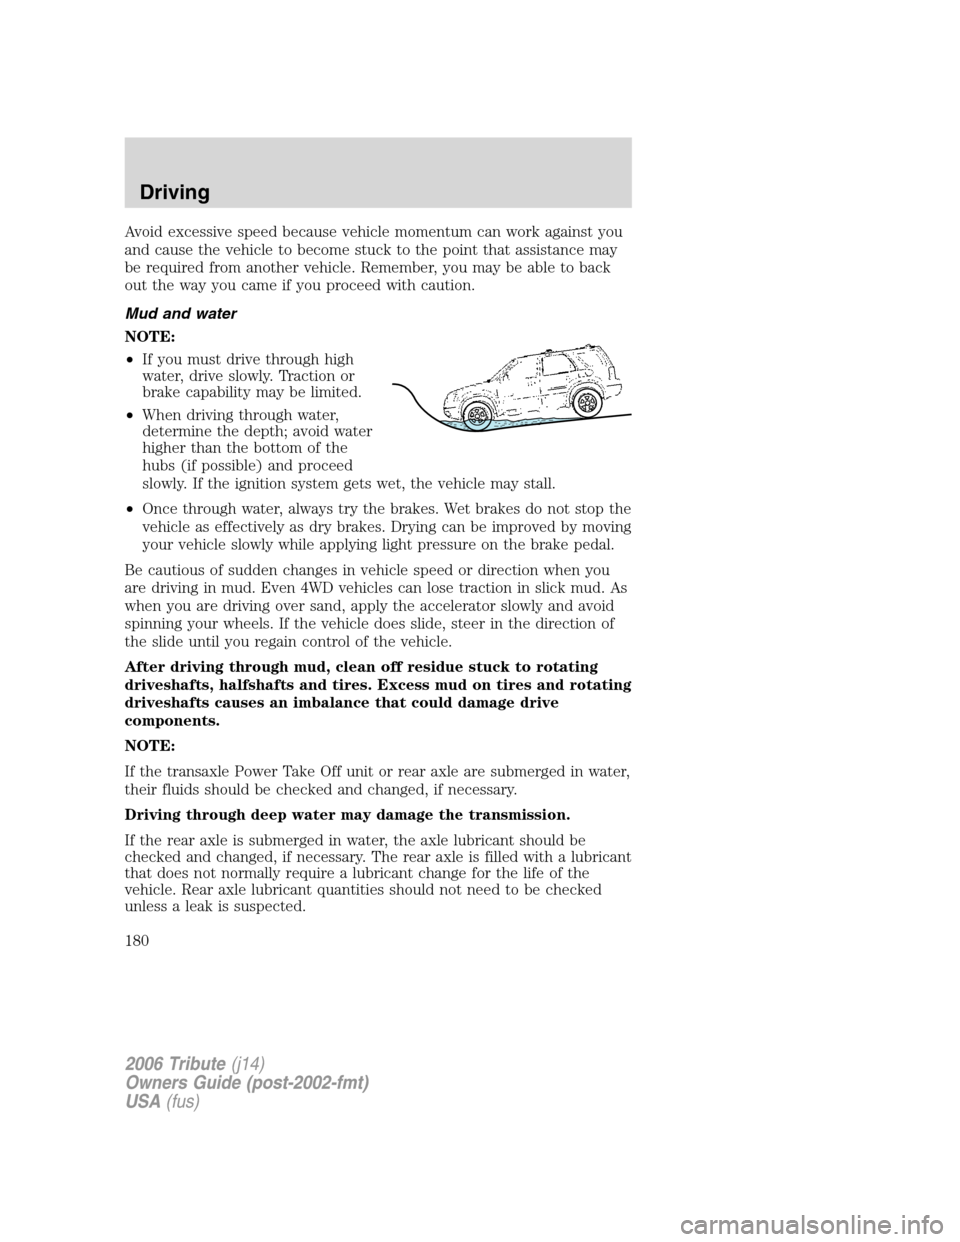 MAZDA MODEL TRIBUTE 2006  Owners Manual (in English) Avoid excessive speed because vehicle momentum can work against you
and cause the vehicle to become stuck to the point that assistance may
be required from another vehicle. Remember, you may be able t